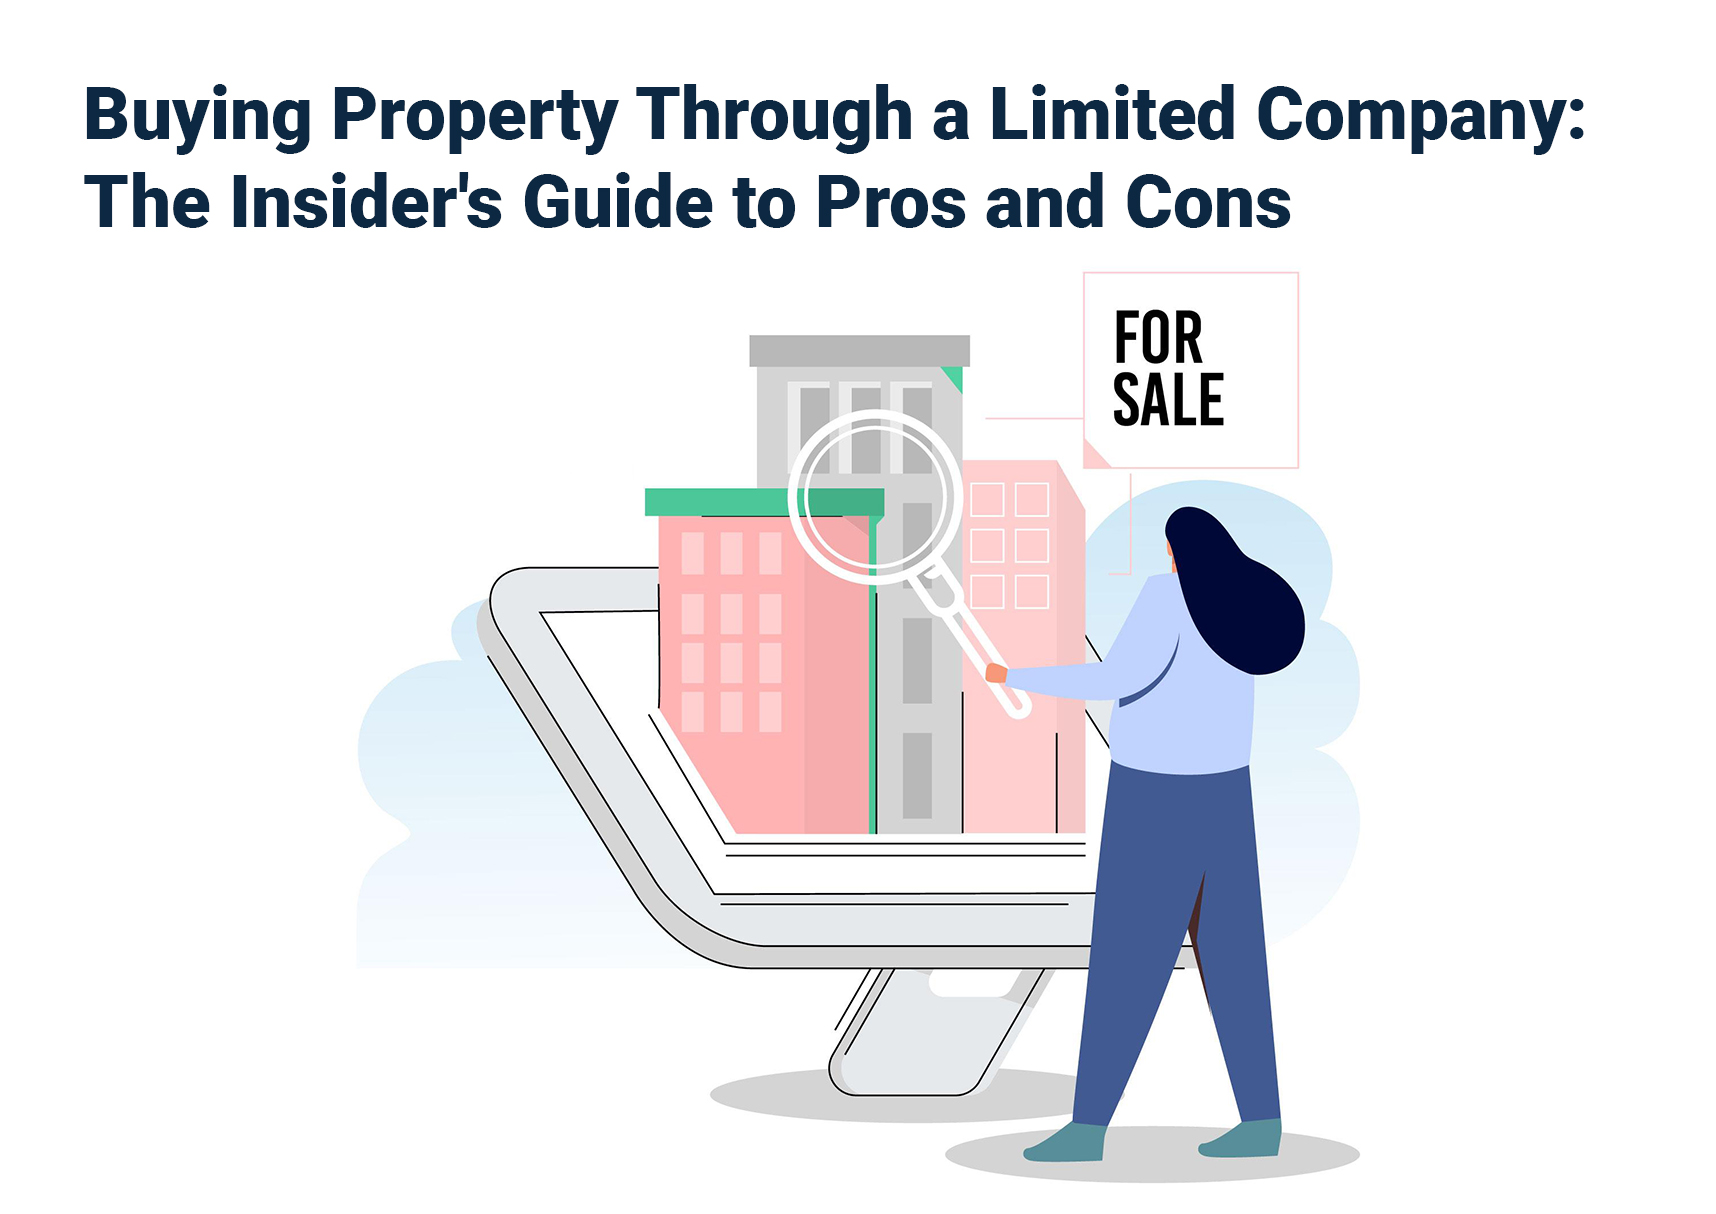 Buying Property Through a Limited Company: Pros and Cons